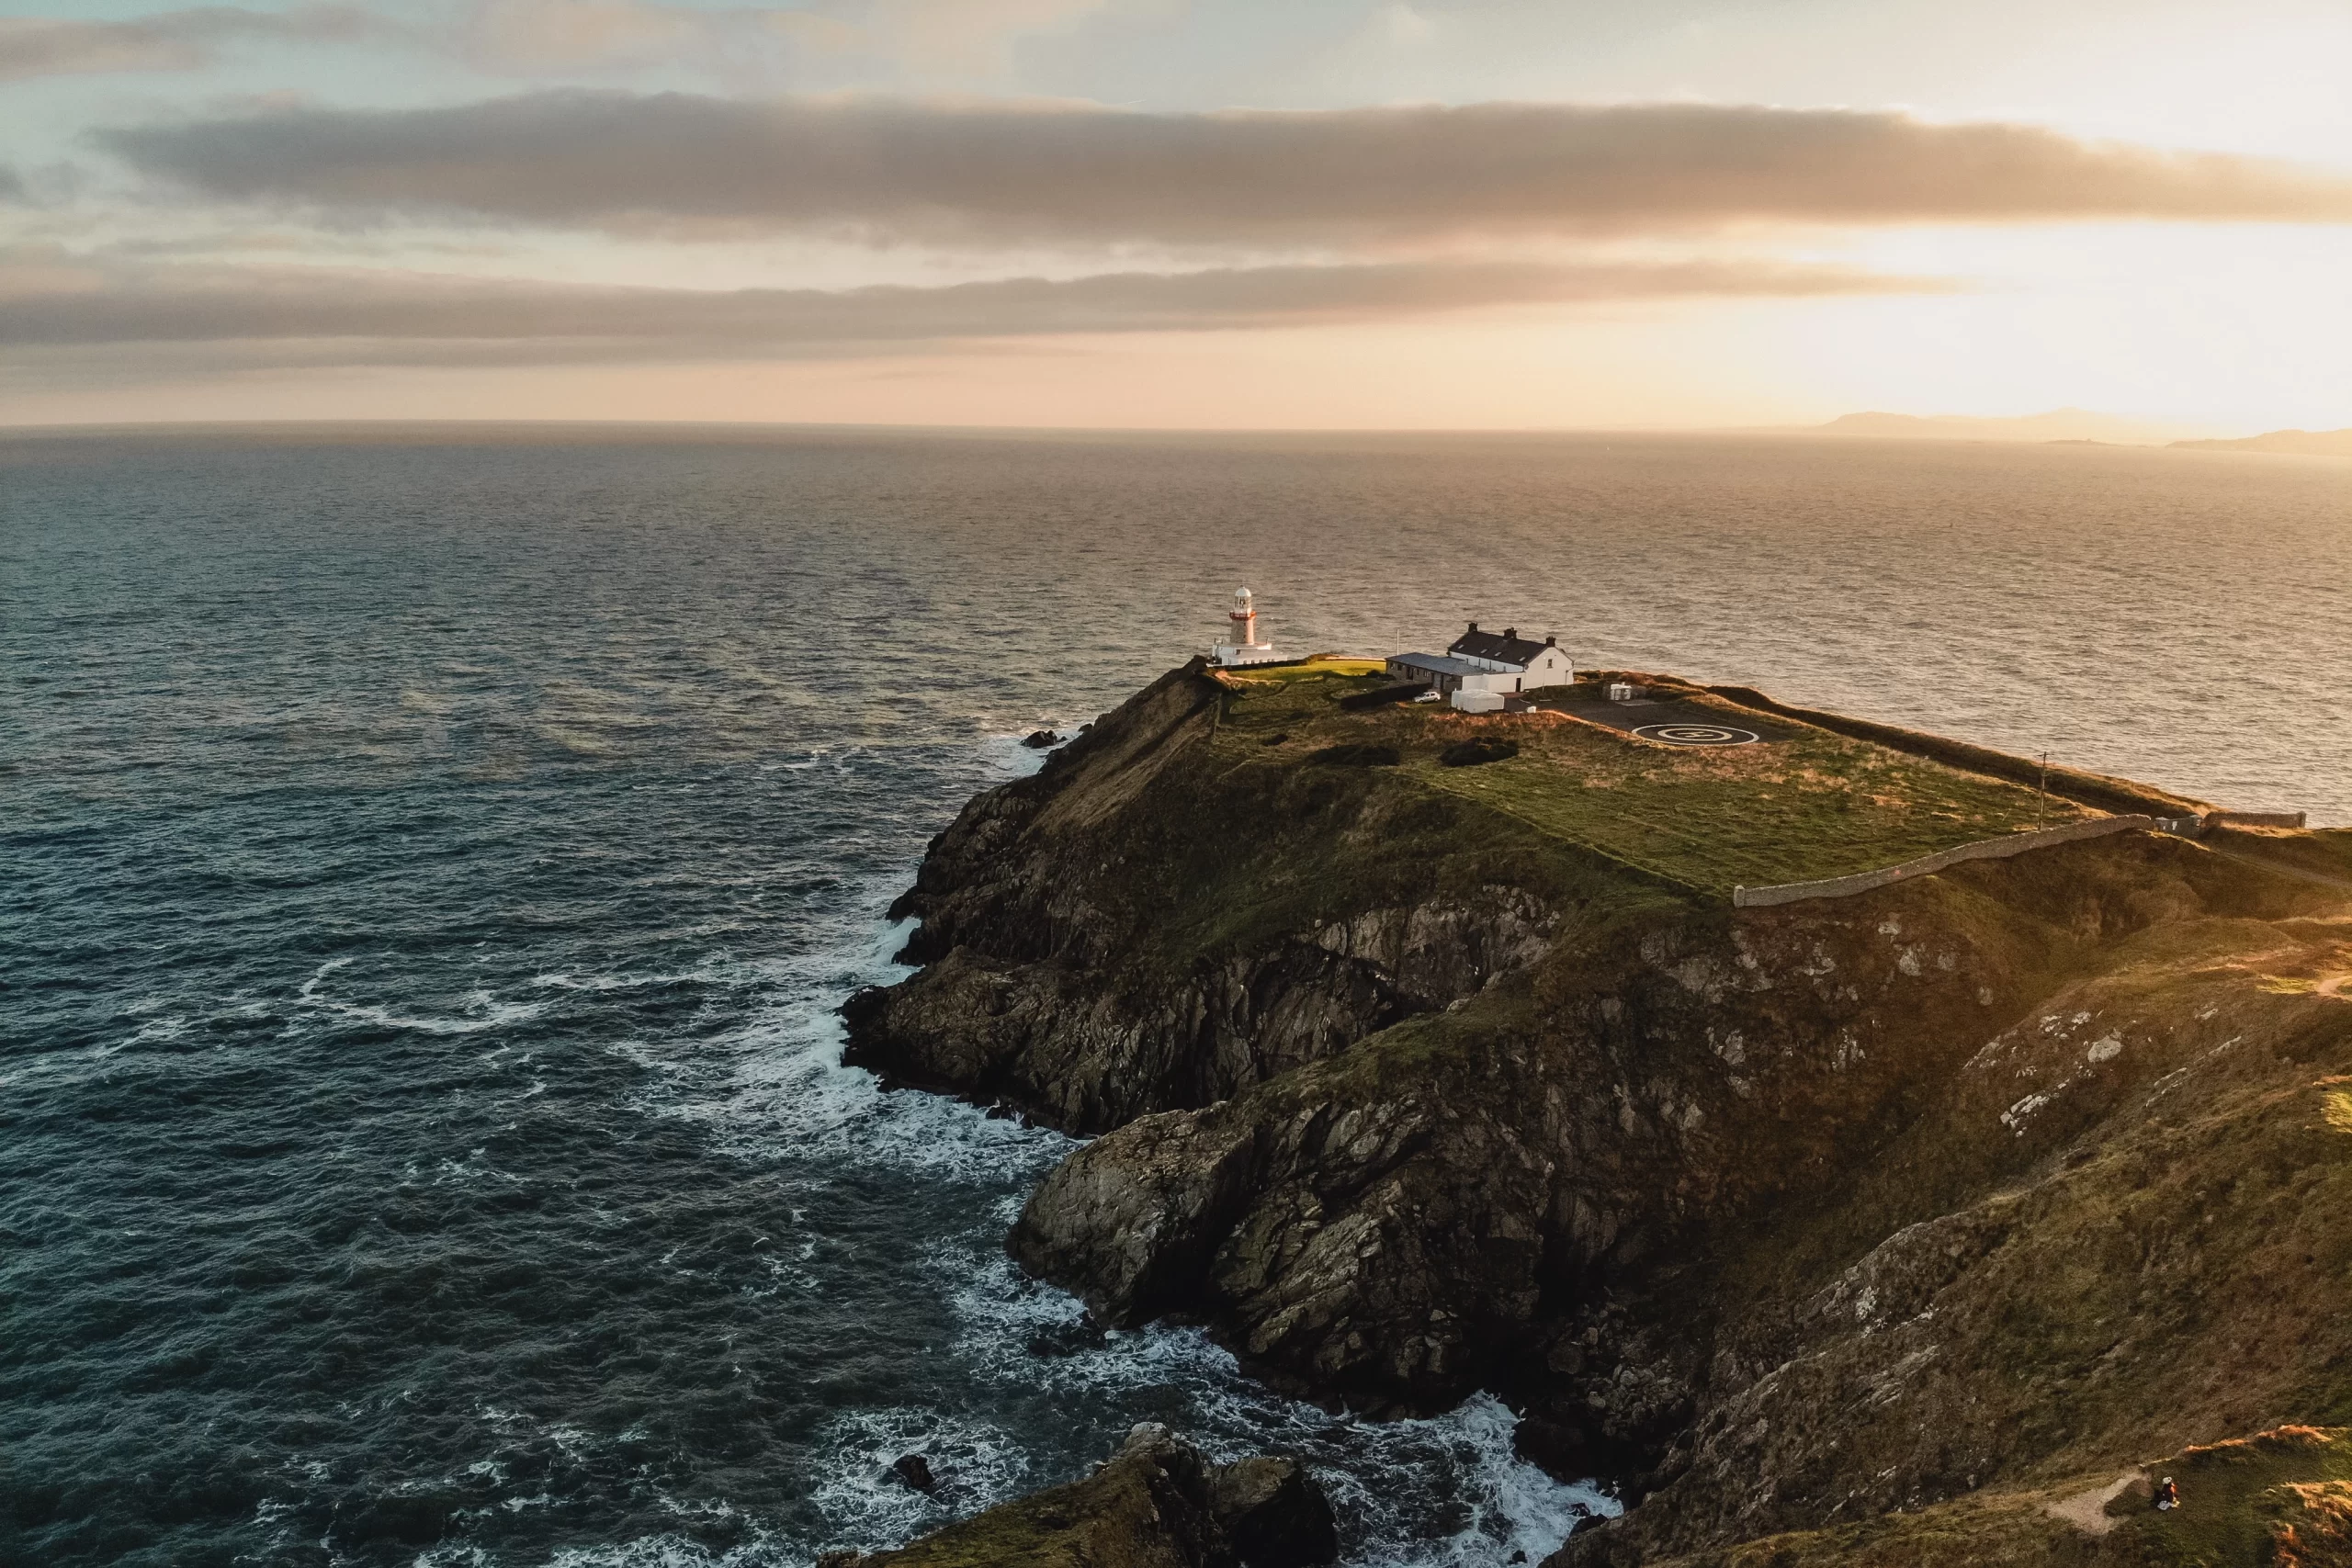 Howth beacon, Dublin, Ireland Published on December 18, 2018 DJI, FC2103 Free to use under the Unsplash License